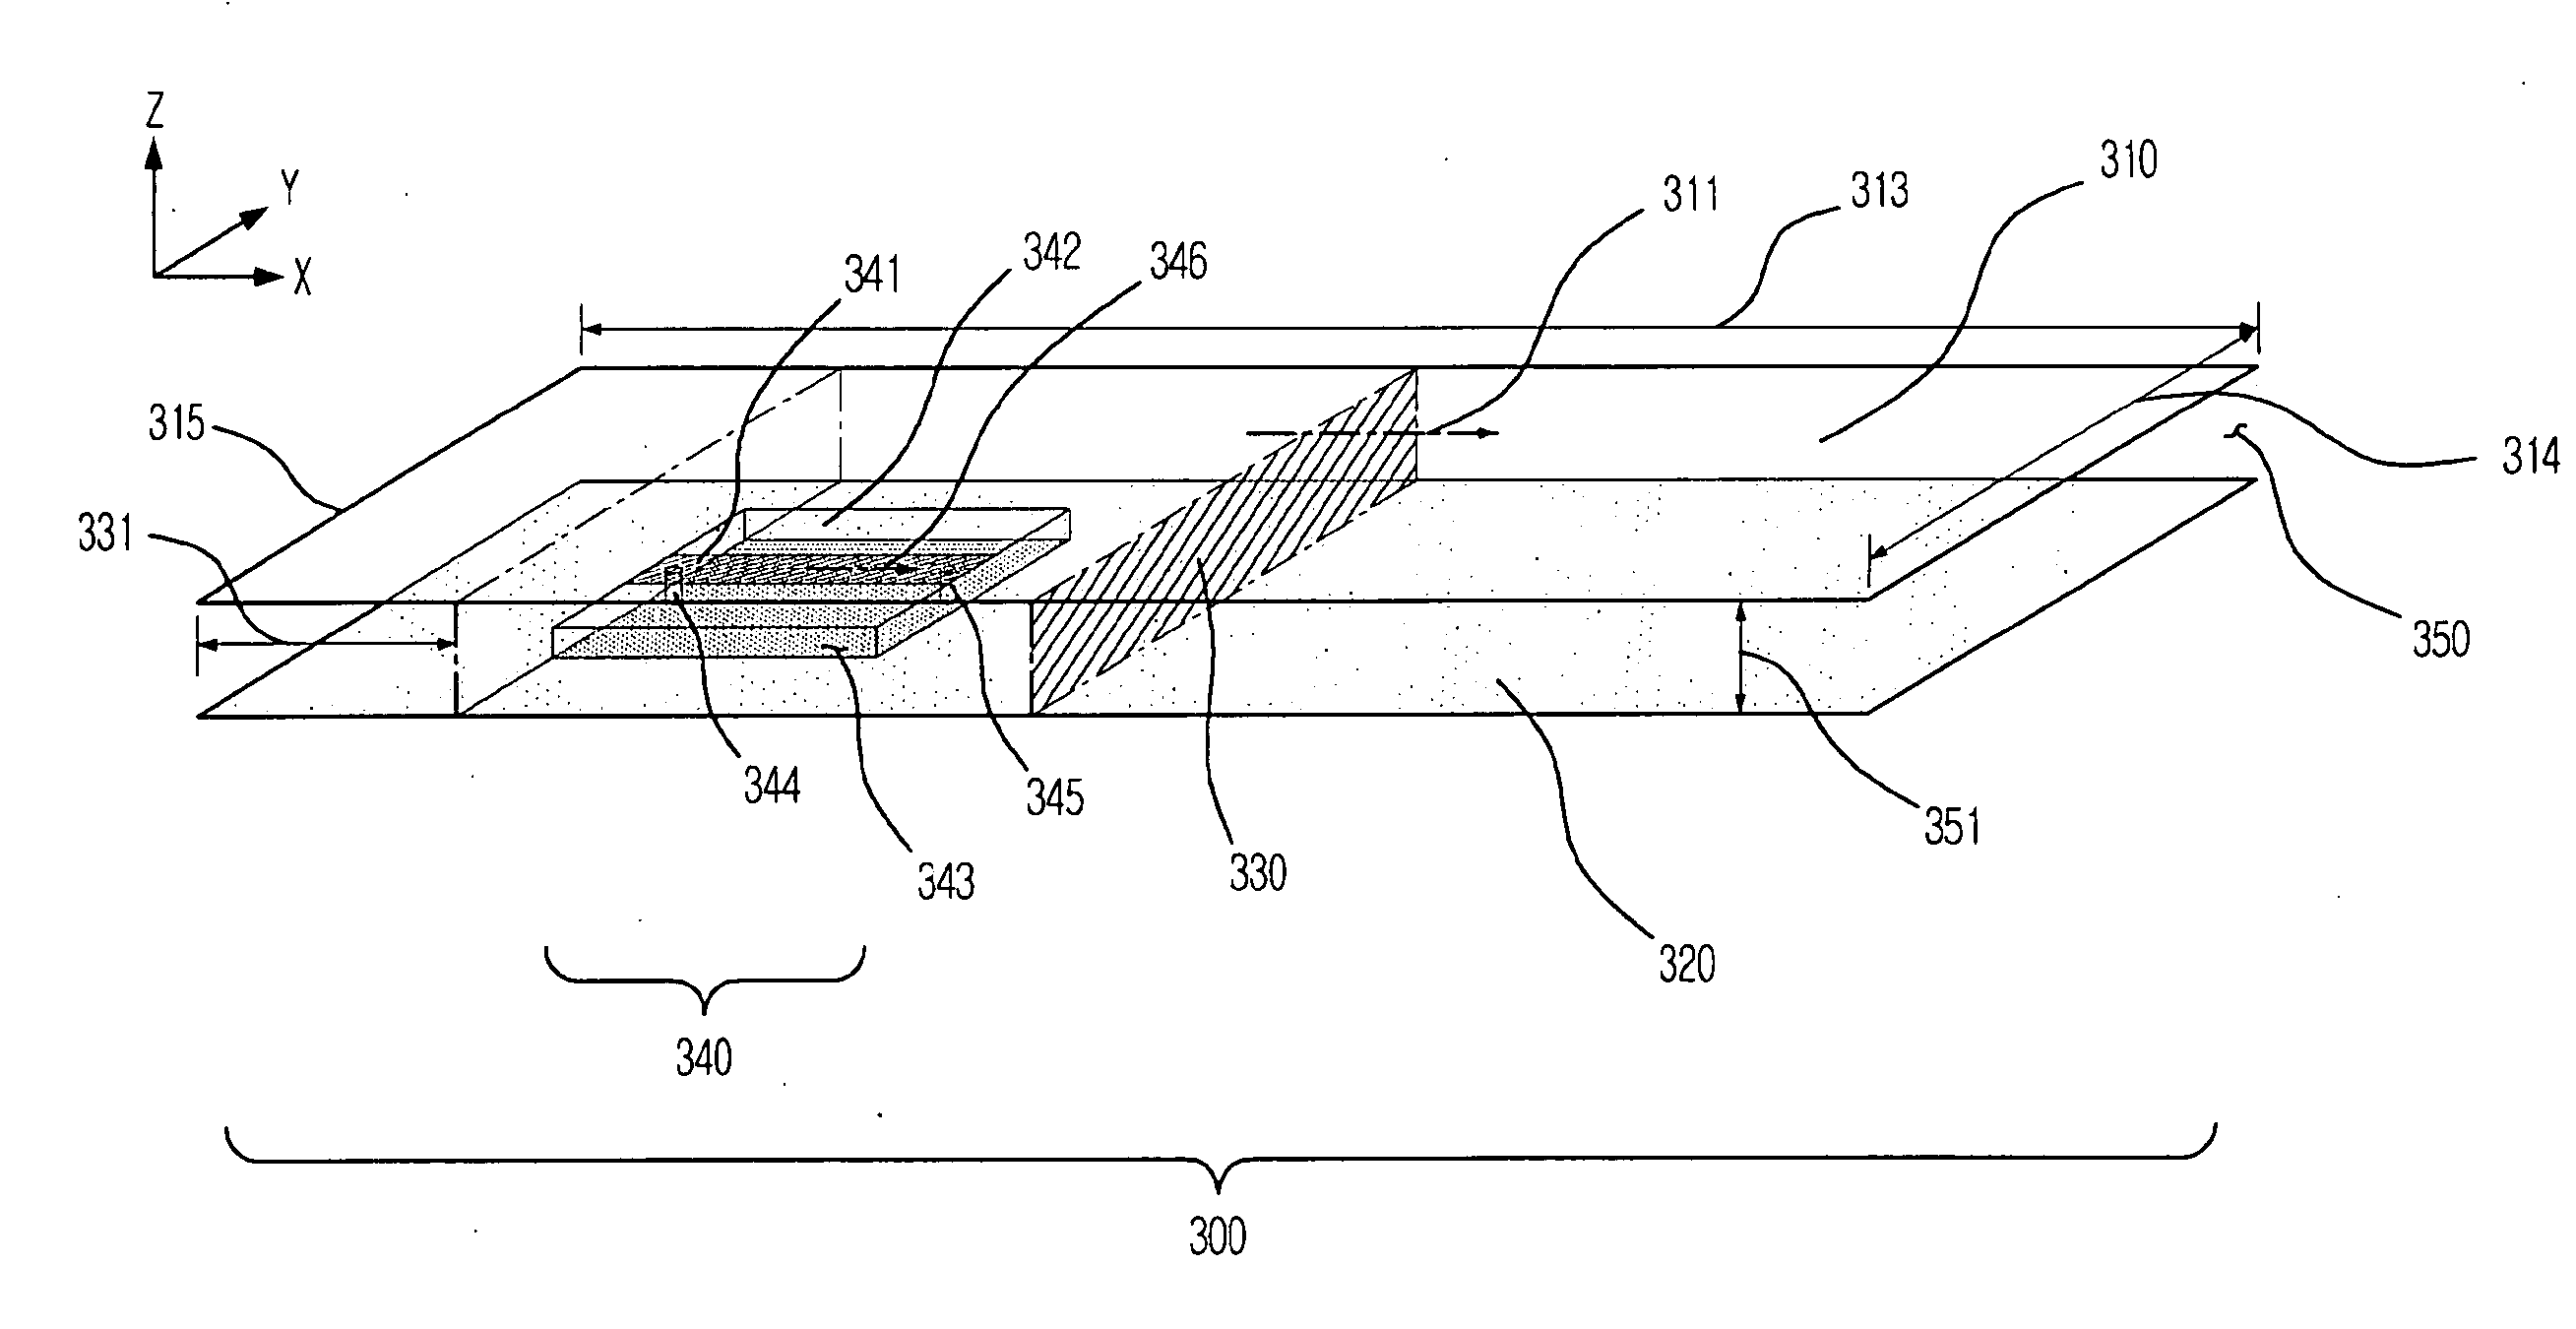 Antenna Using Proximity-Coupling Between Radiation Patch and Short-Ended Feed Line, Rfid Tag Employing the Same, and Antenna Impedance Matching Method Thereof